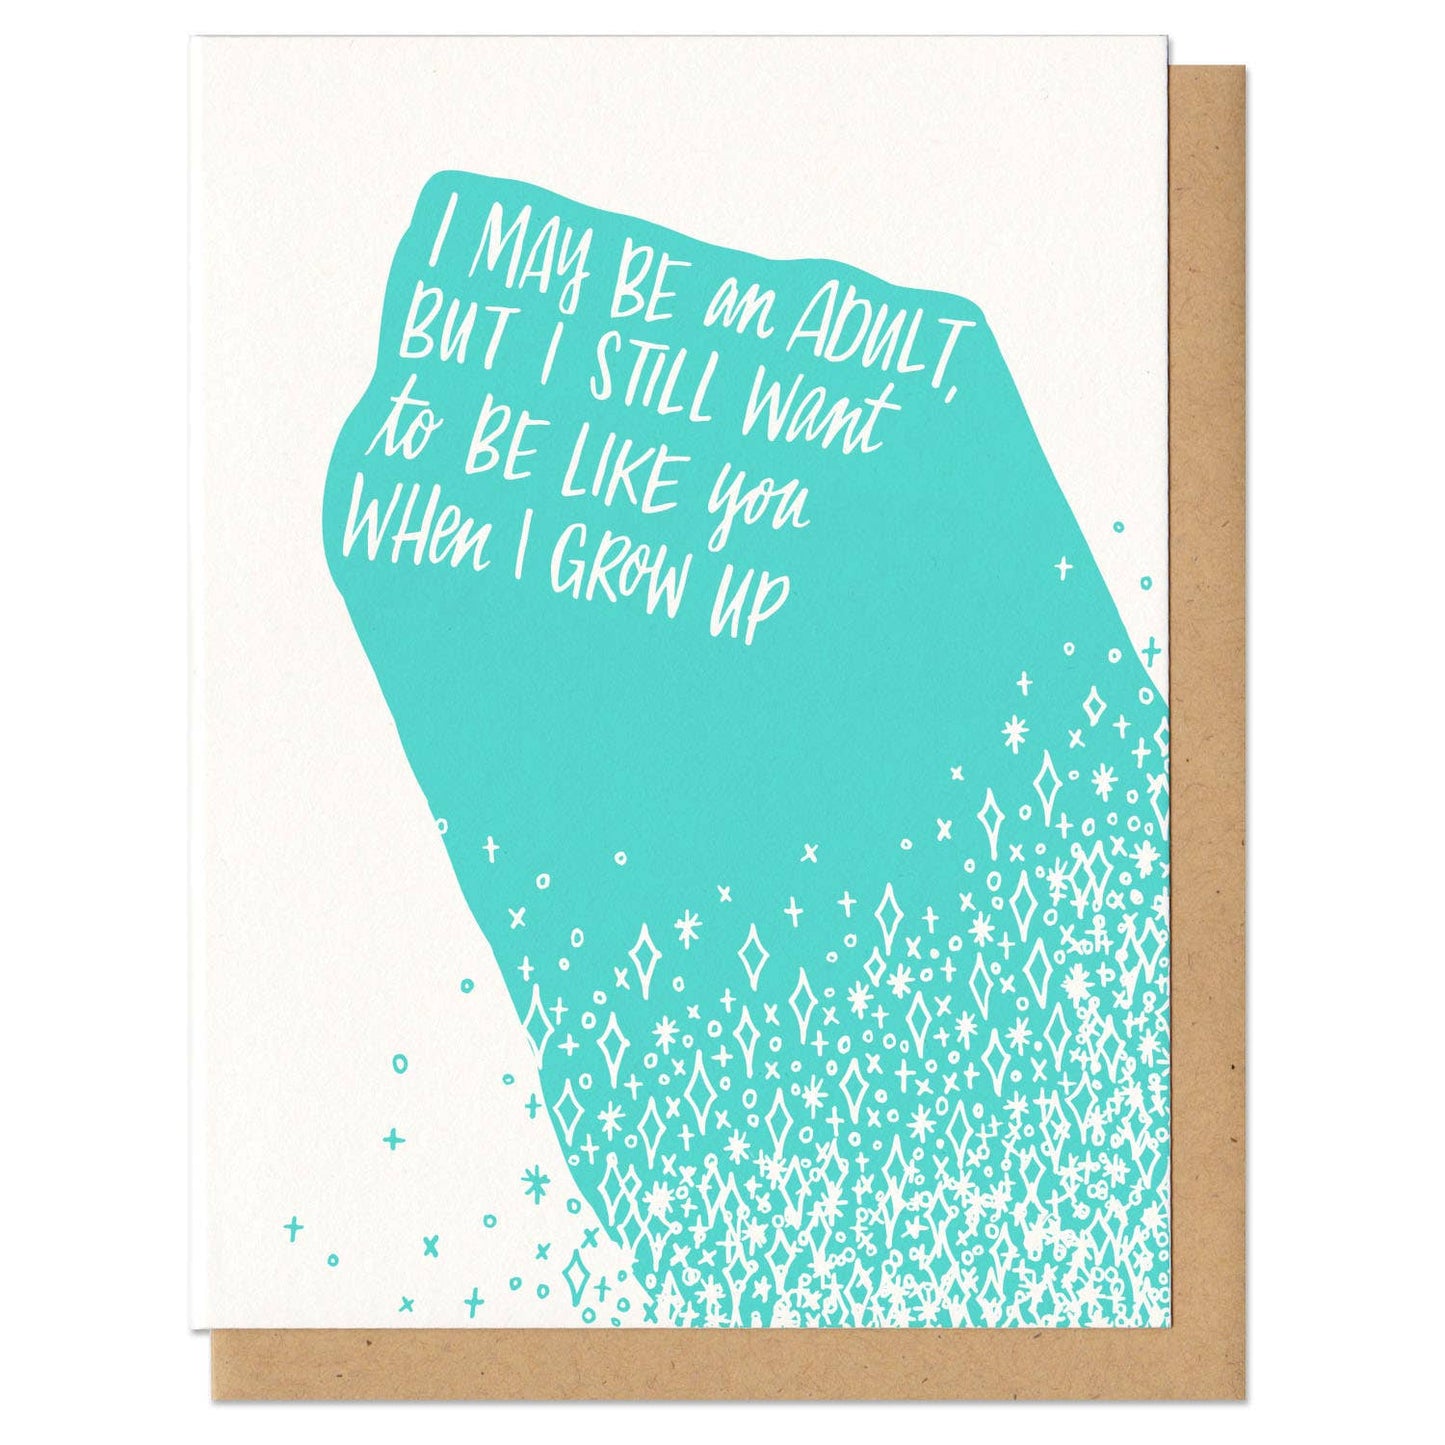 When I Grow Up Greeting Card